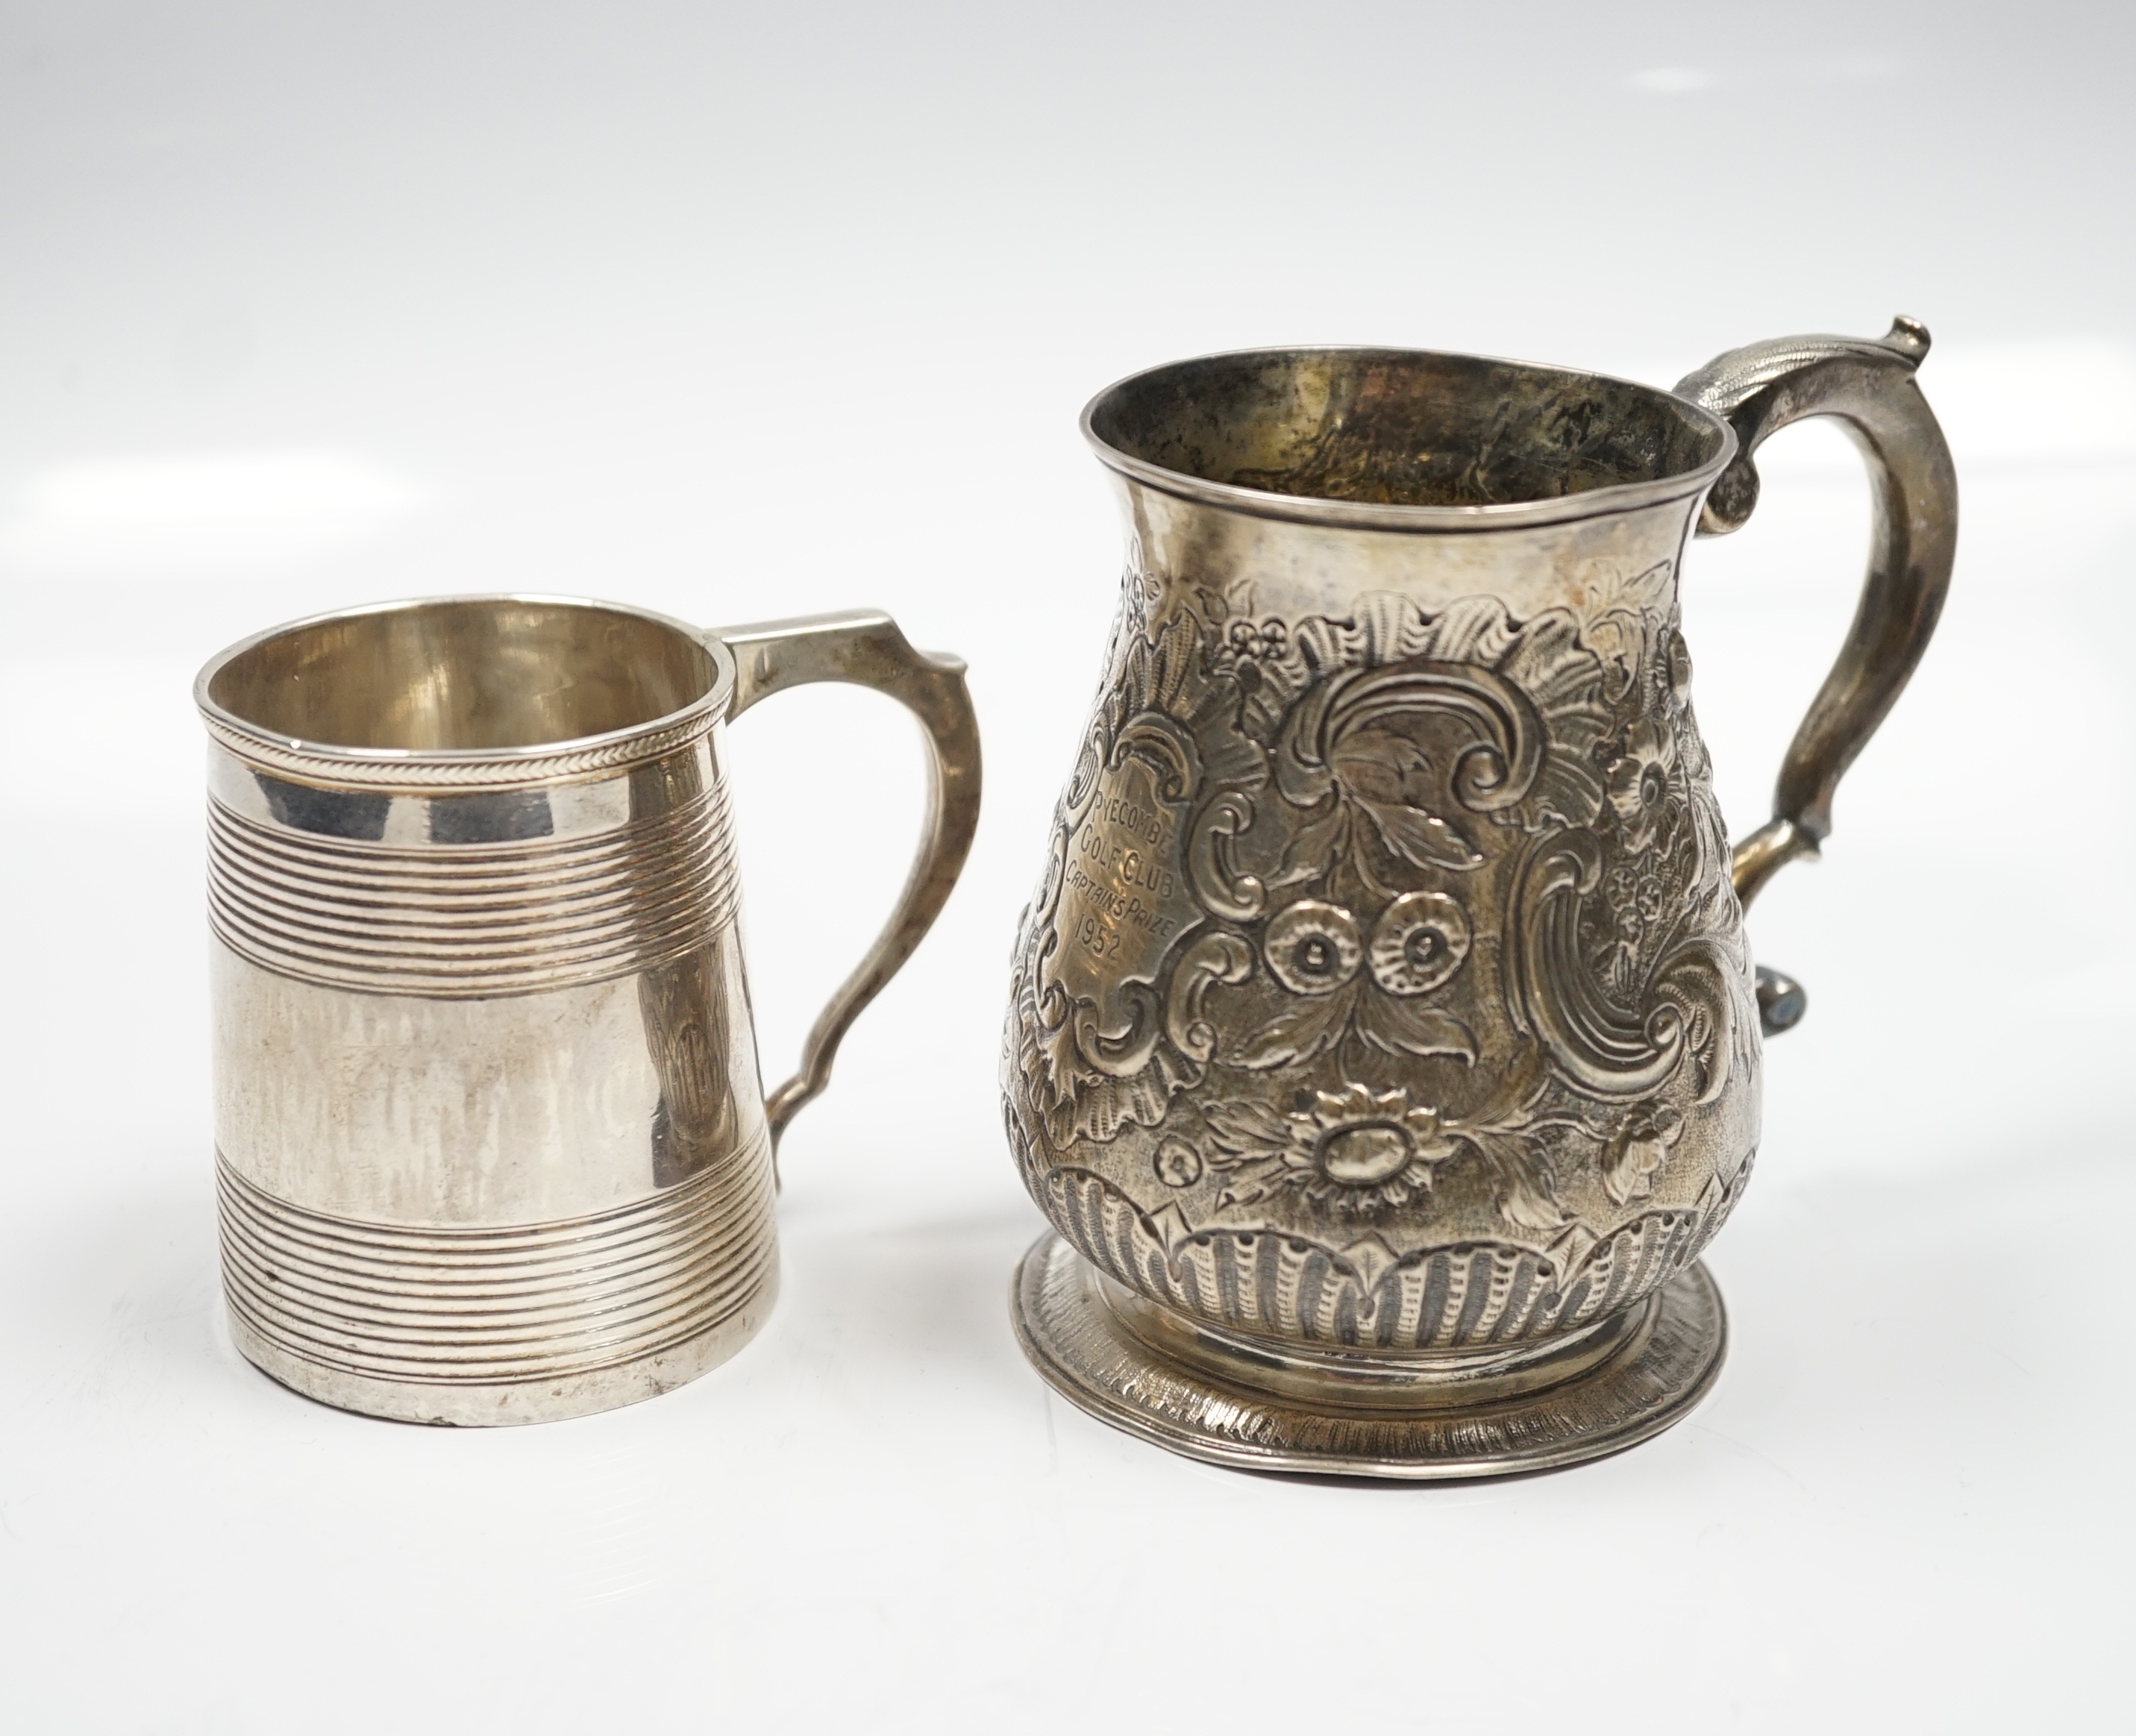 A late George II silver baluster mug, with later embossed decoration, William Shaw II?, London, 1756, 93mm, together with a George III reeded silver small christening mug, London, 1814.